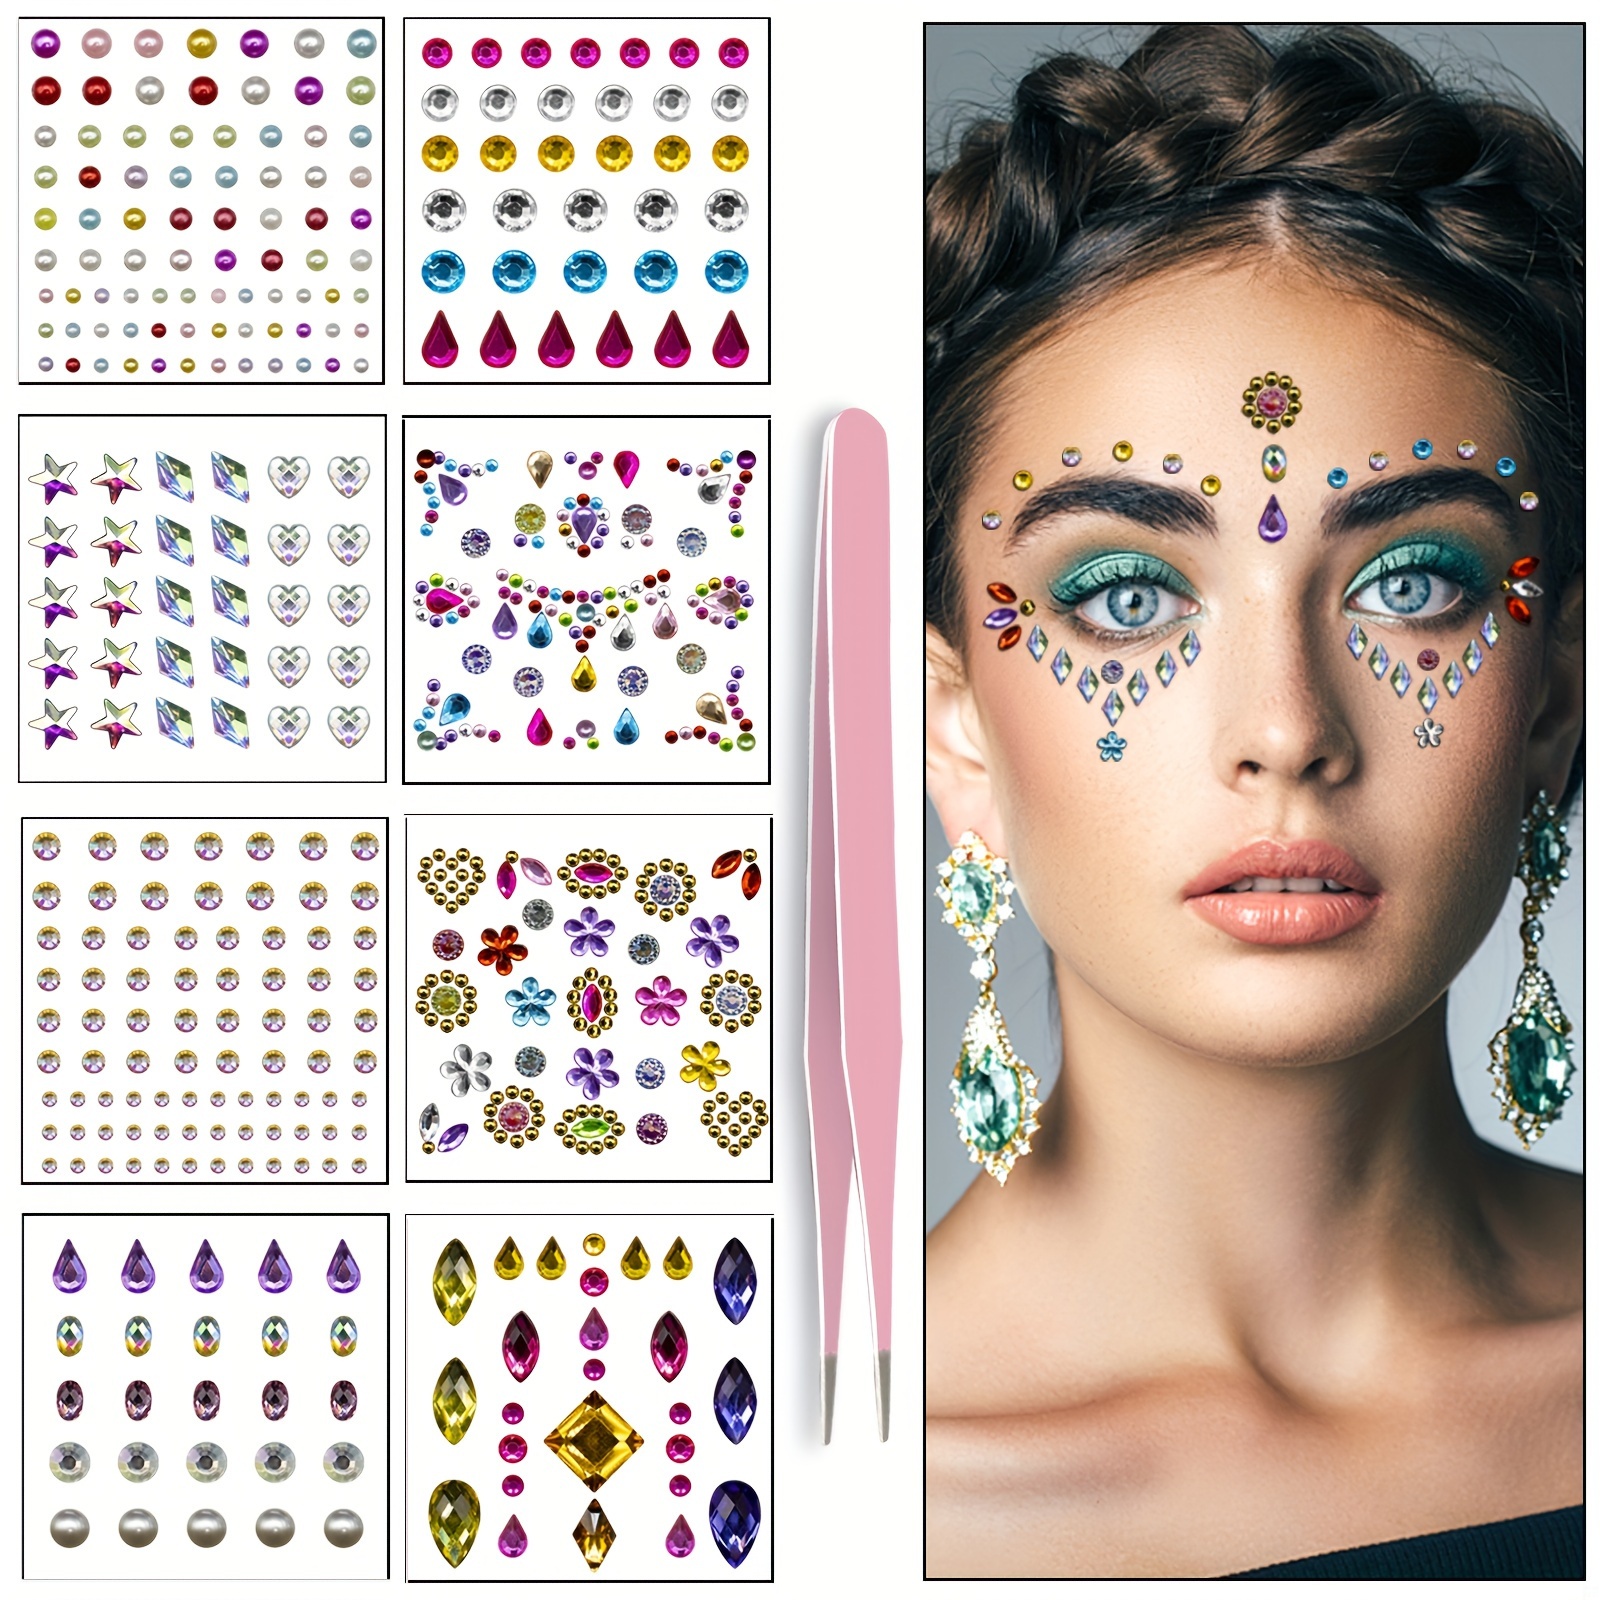 Eyenice Face Jewels And Body Glitter - Face Gems, Mermaid Face